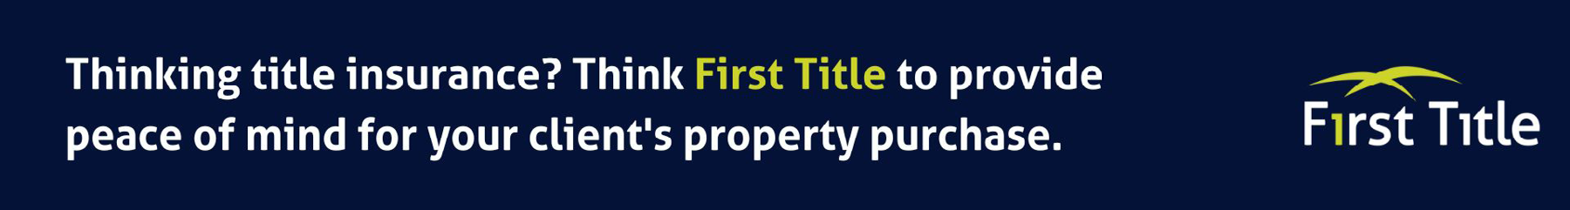 First Title Insurance 